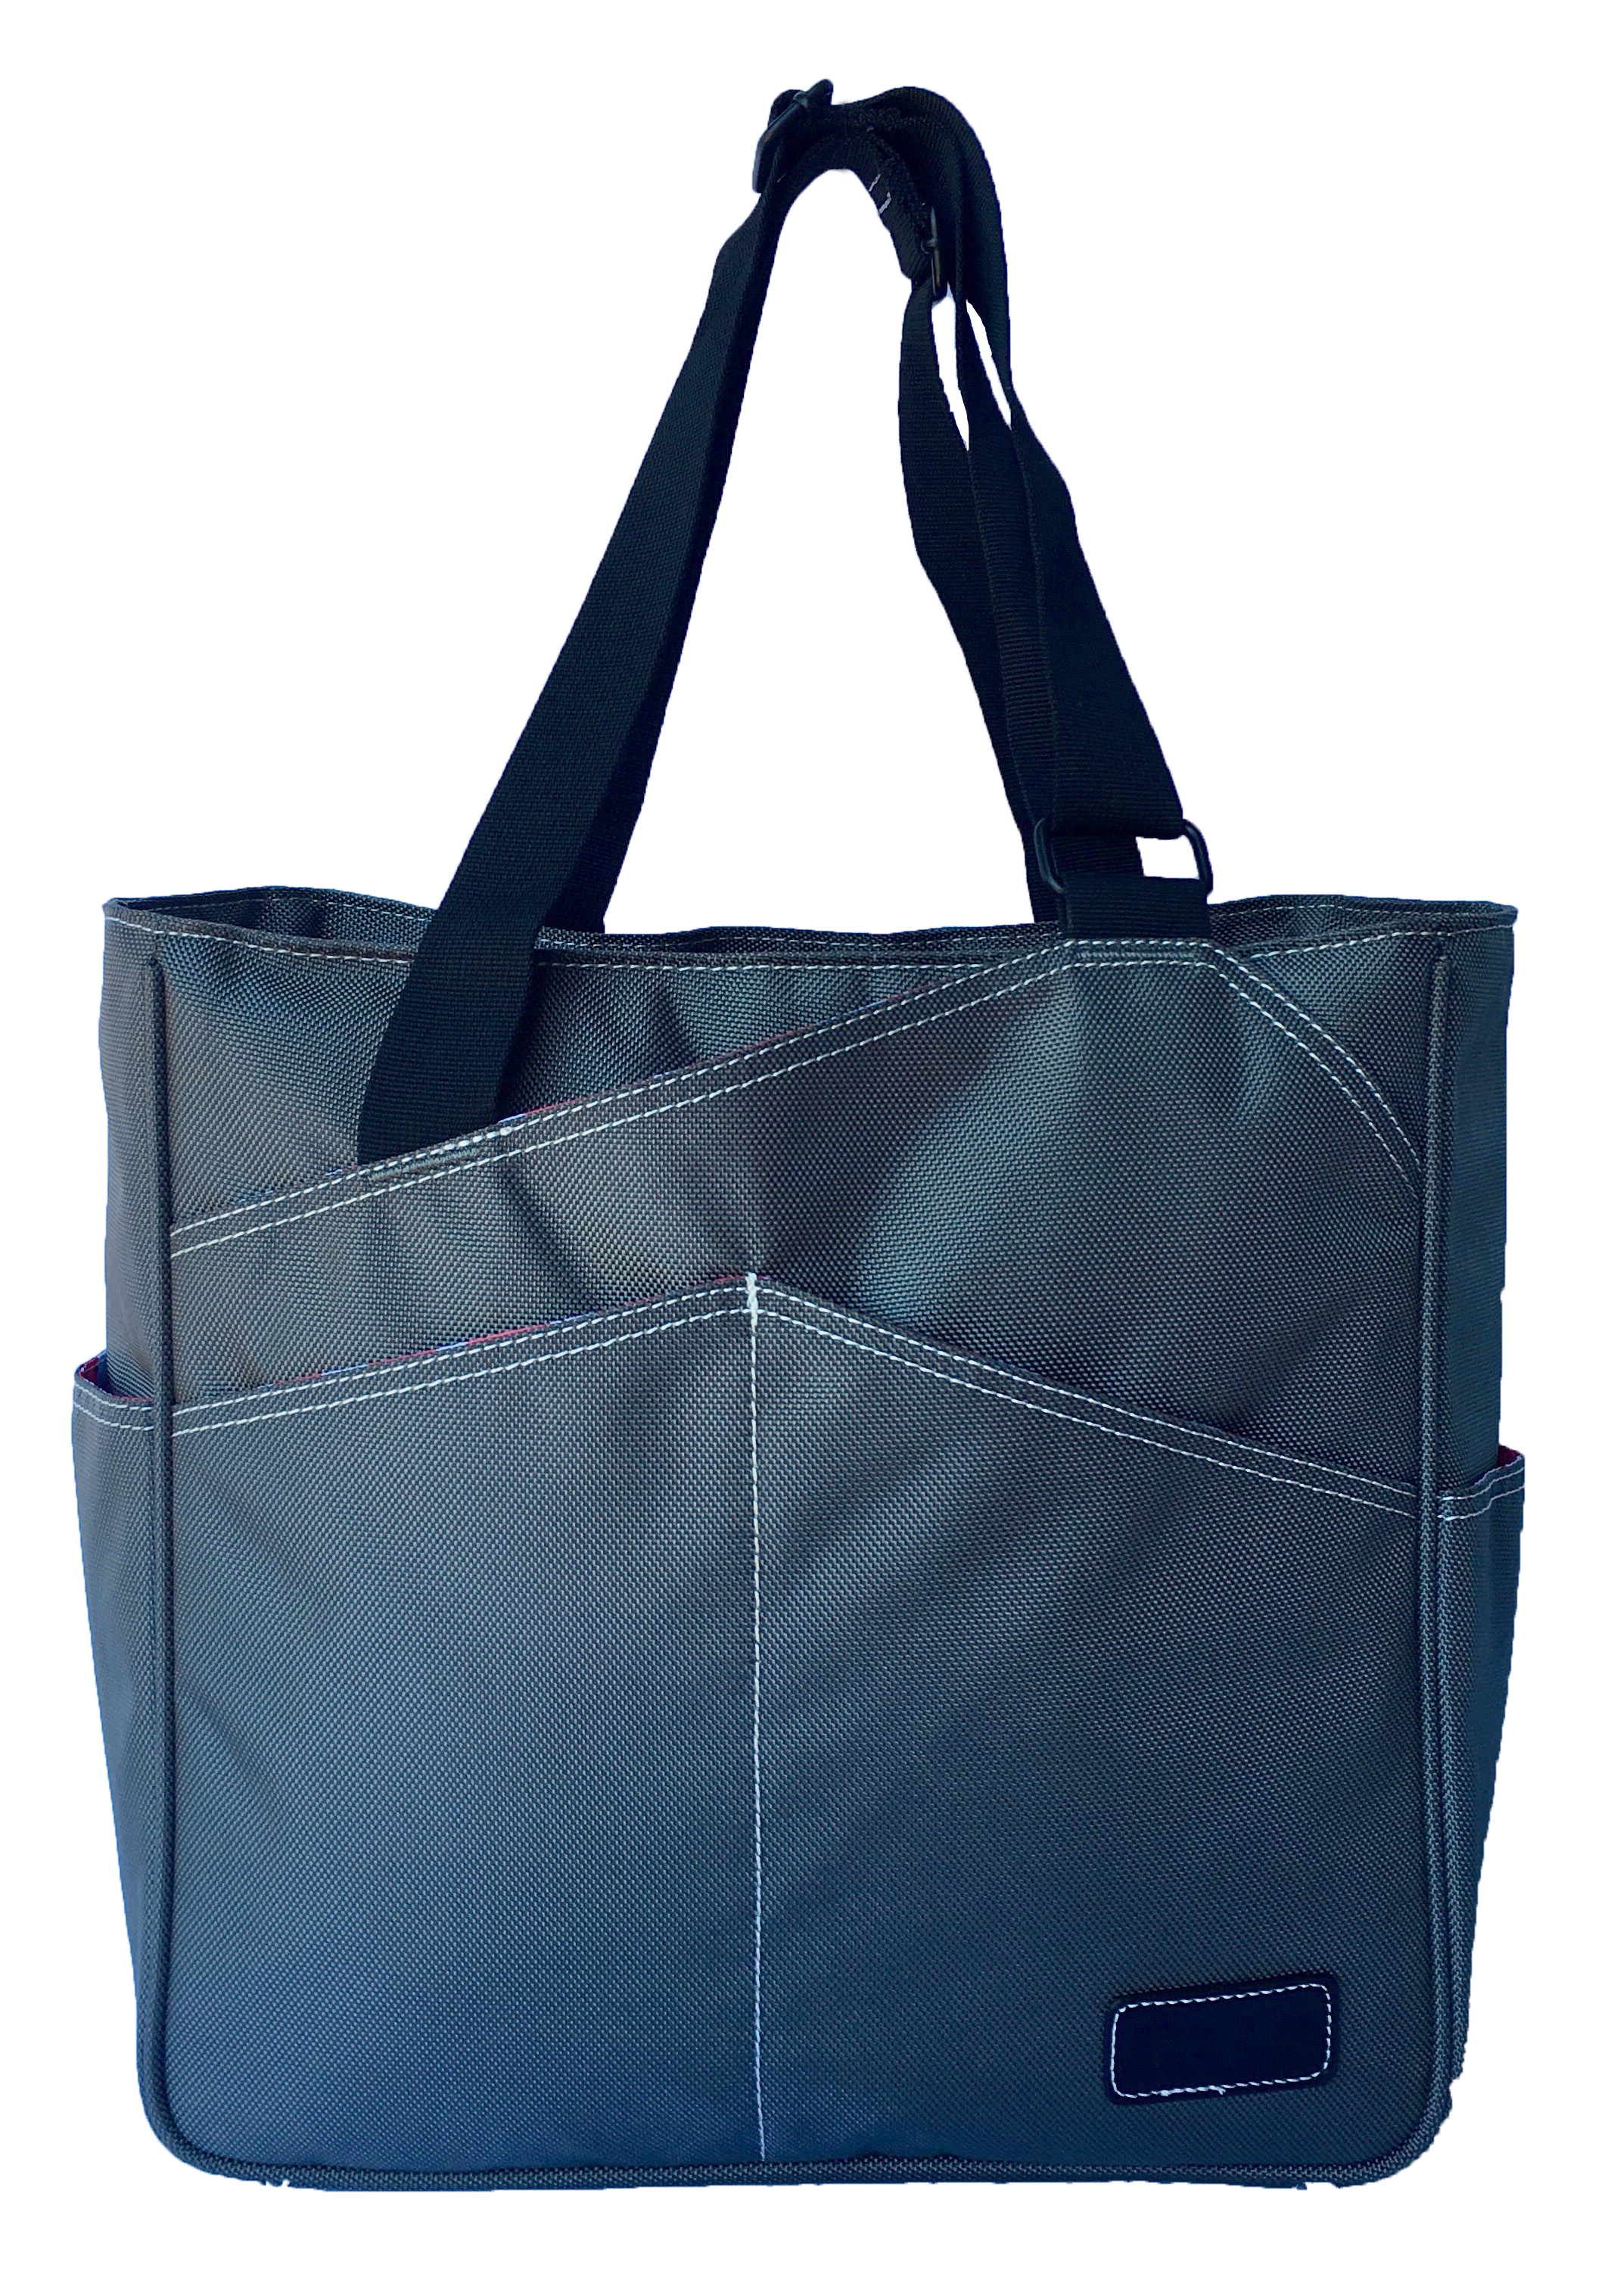 Maggie Mather Pickleball Tote Bag (Pewter)